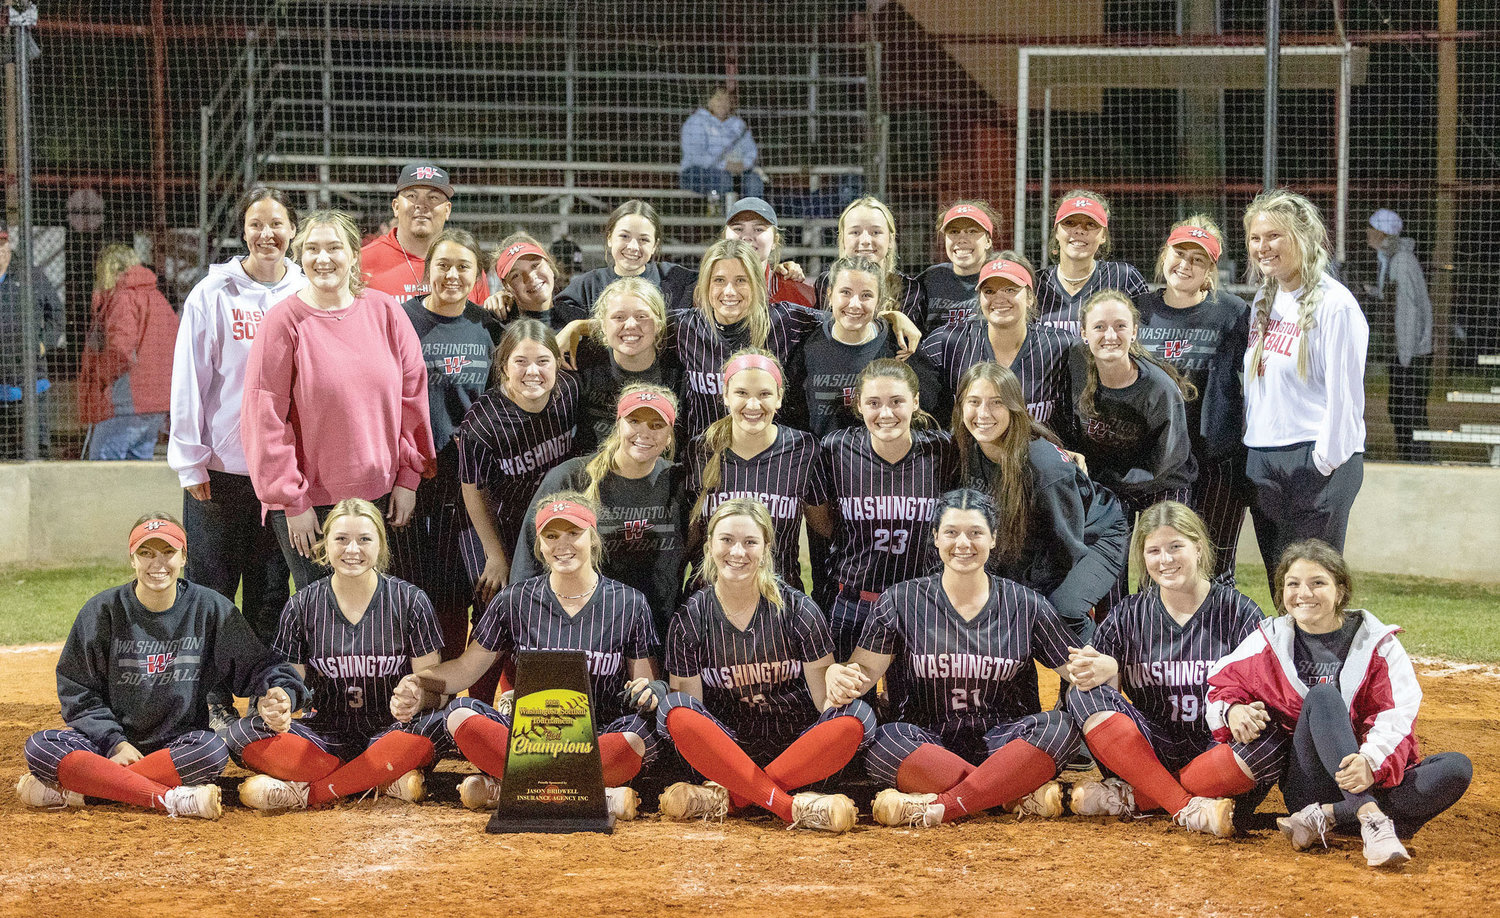 The Washington slow-pitch softball team claimed the championship at their own tournament Saturday evening after they defeated Class 6A No. 1 Mustang 23-13. They outscored their opponents 101 to 36 in the tournament.